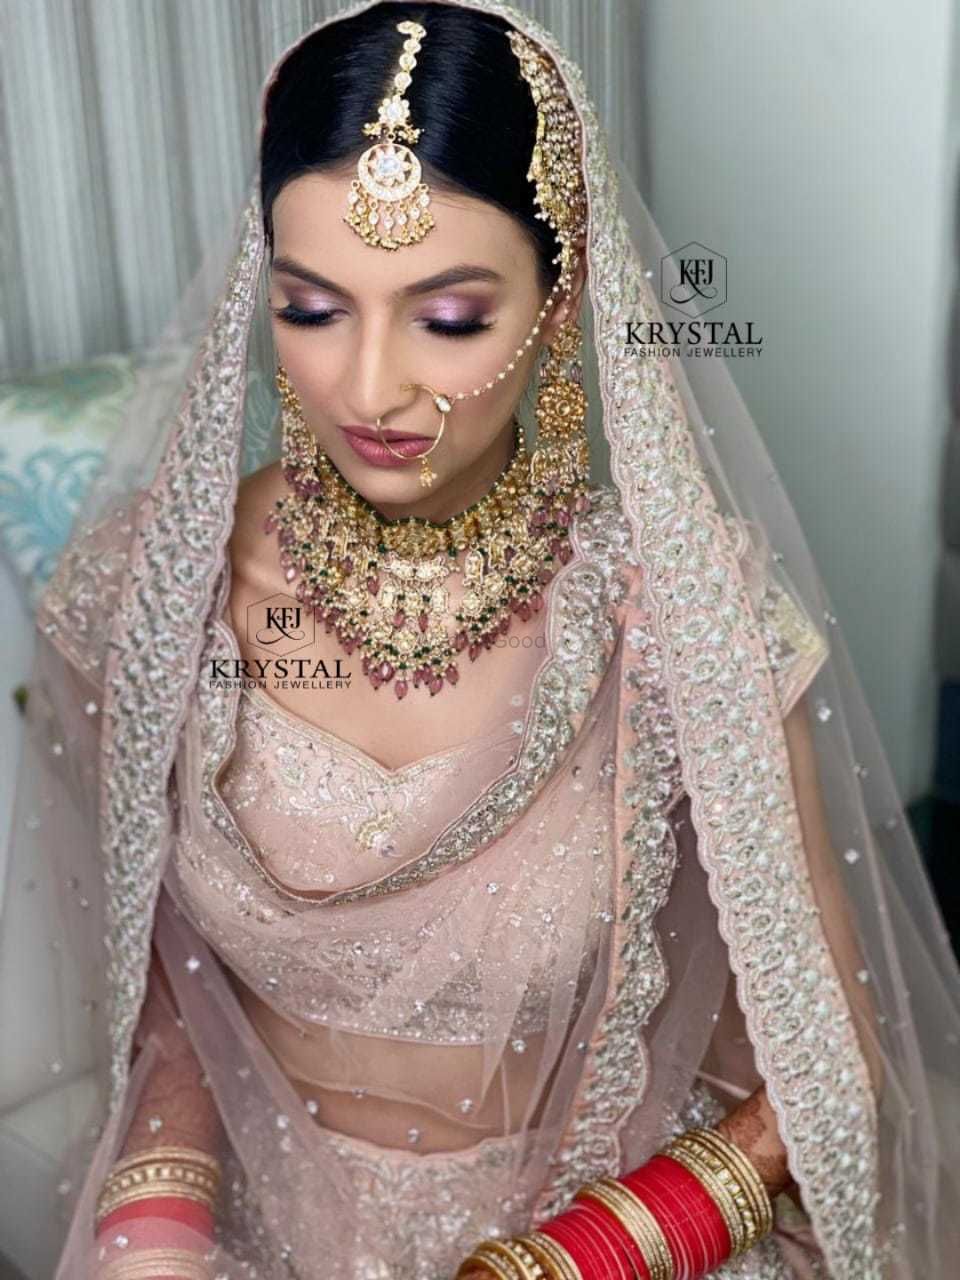 Photo From Royal brides - By Krystal Fashion Jewellery